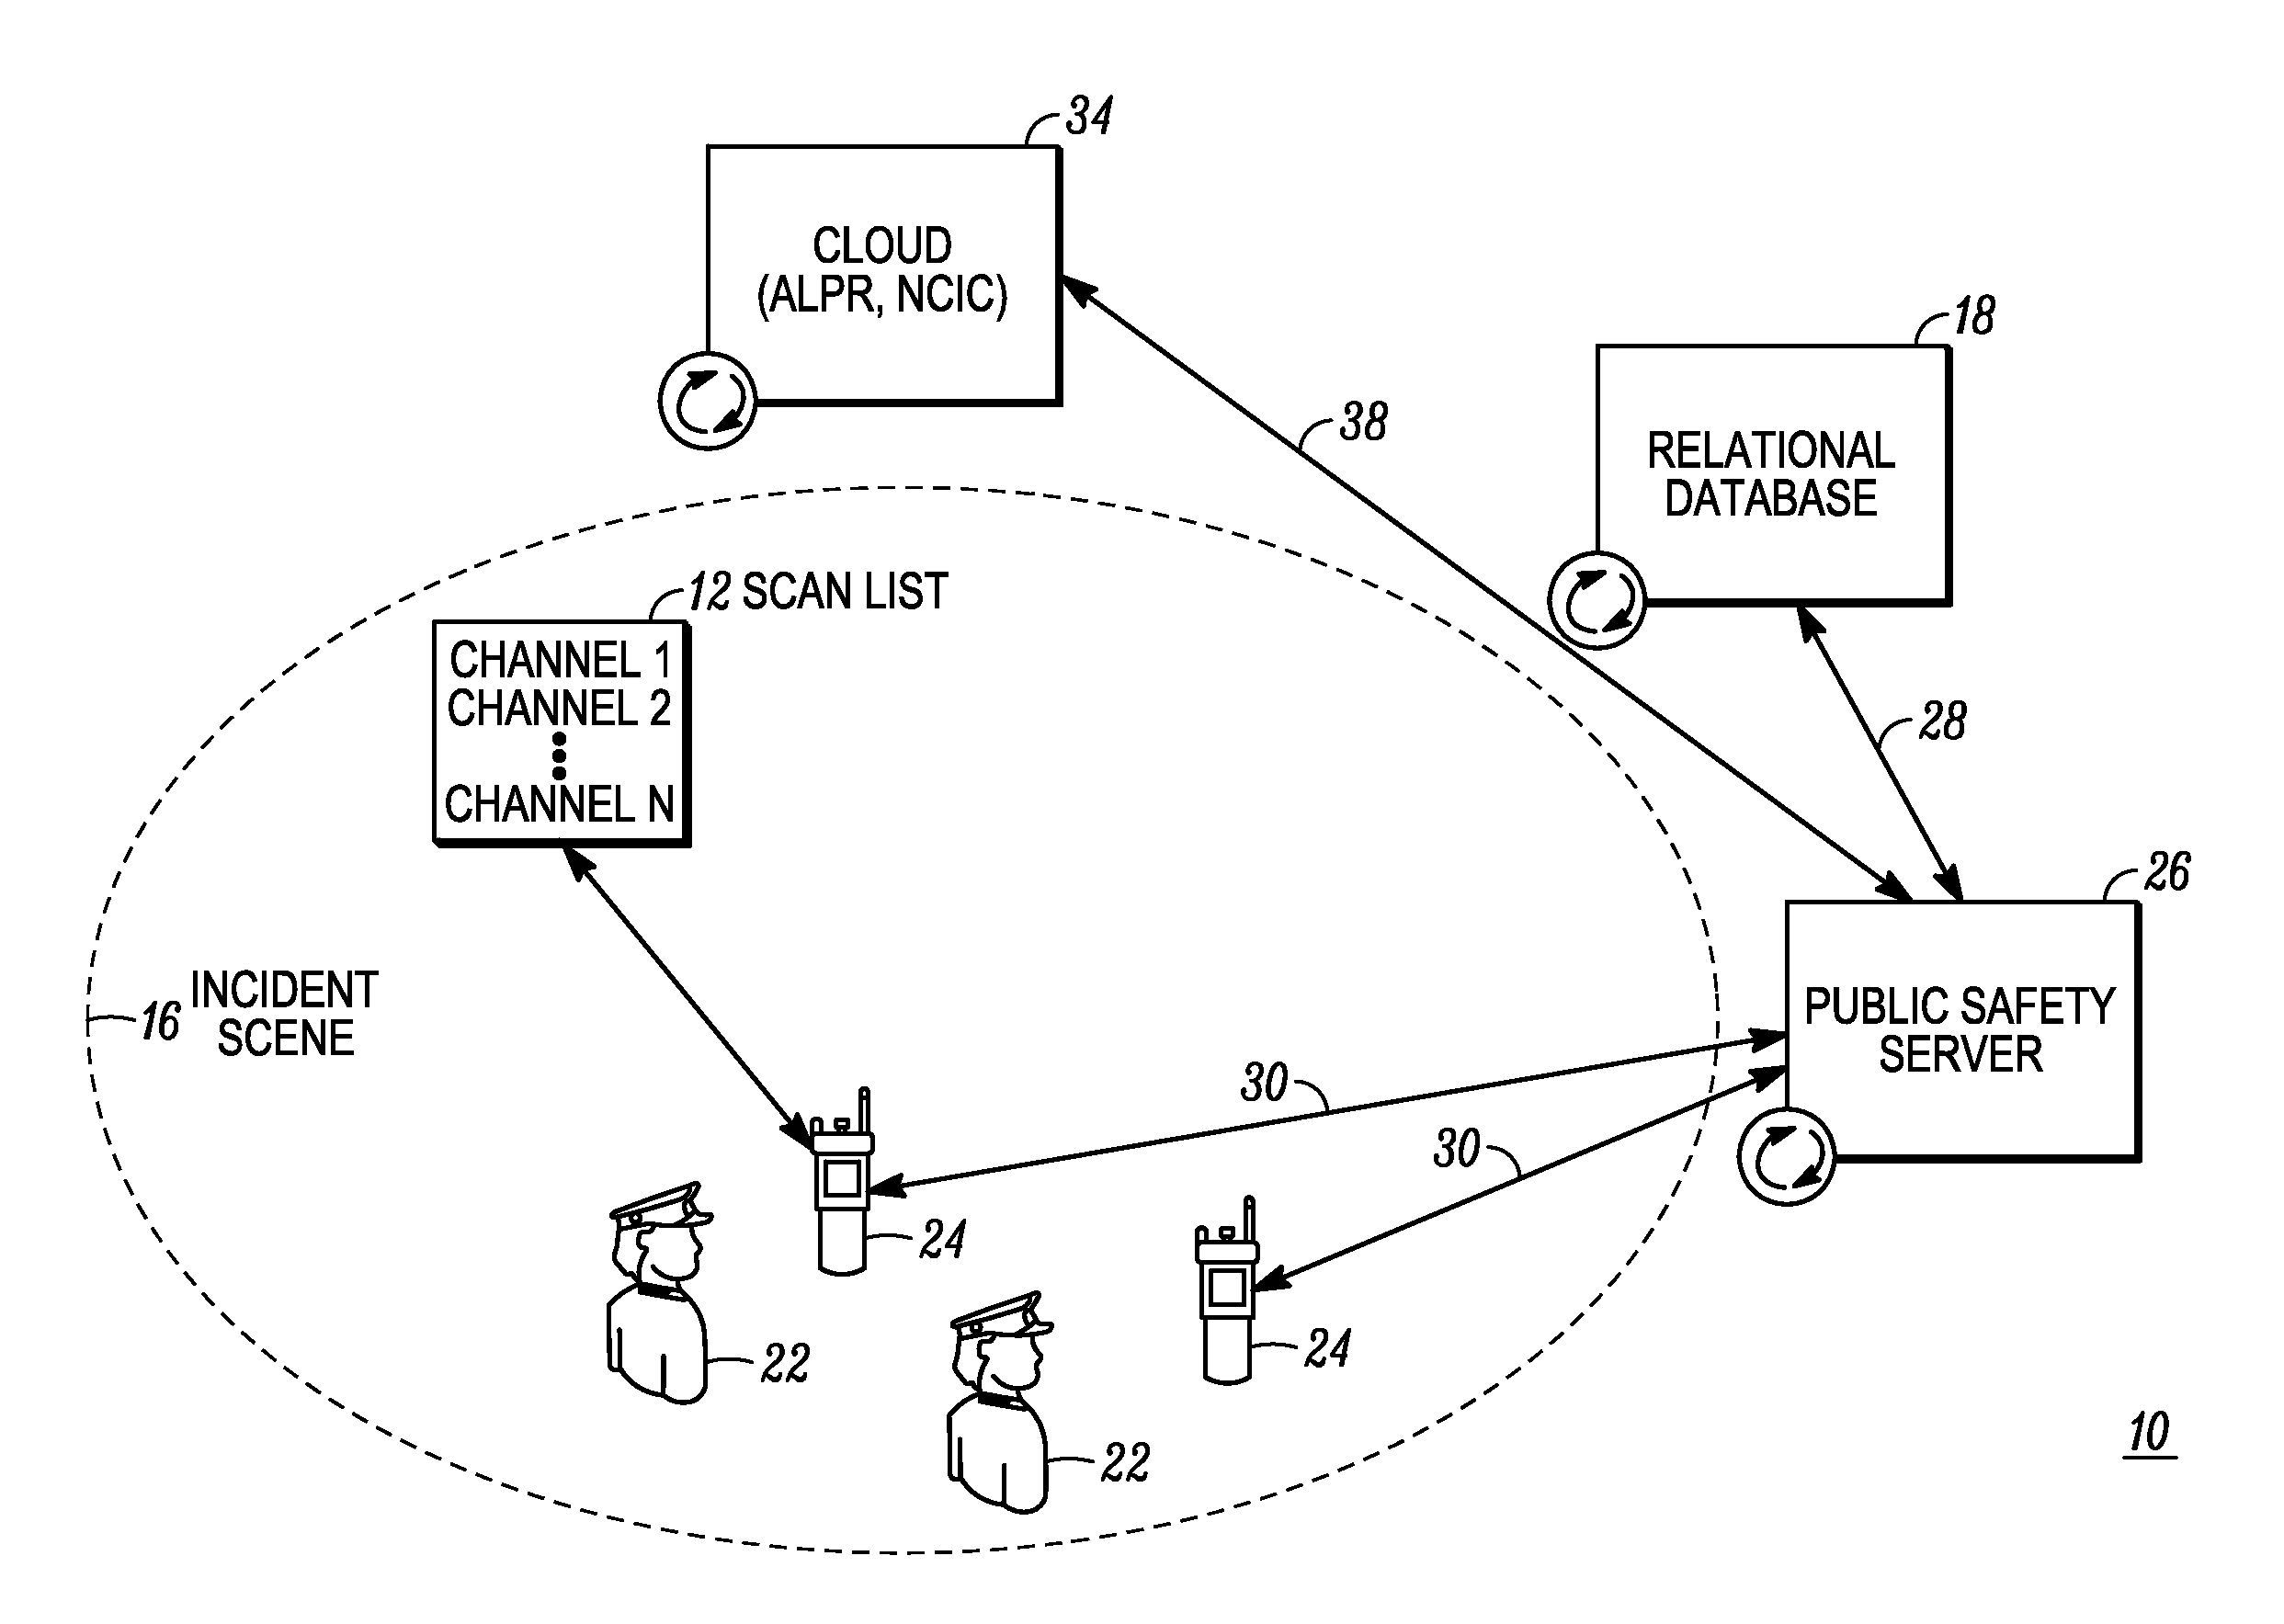 Method of and system for controlling communications over a public safety network